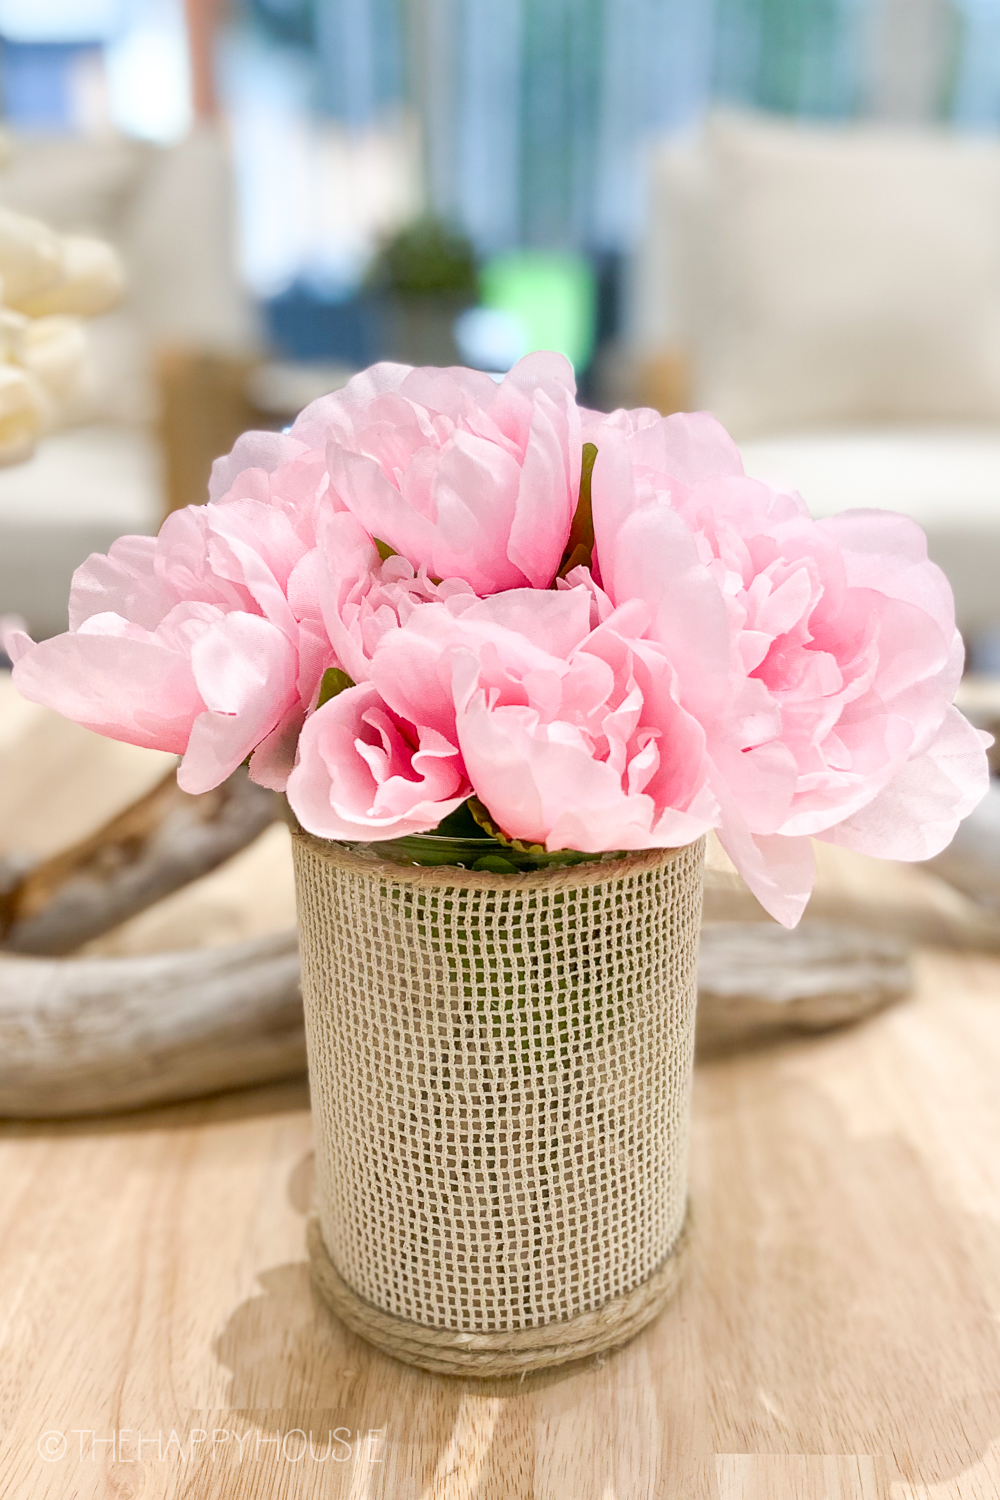 A cane vase with pink peonies in it.